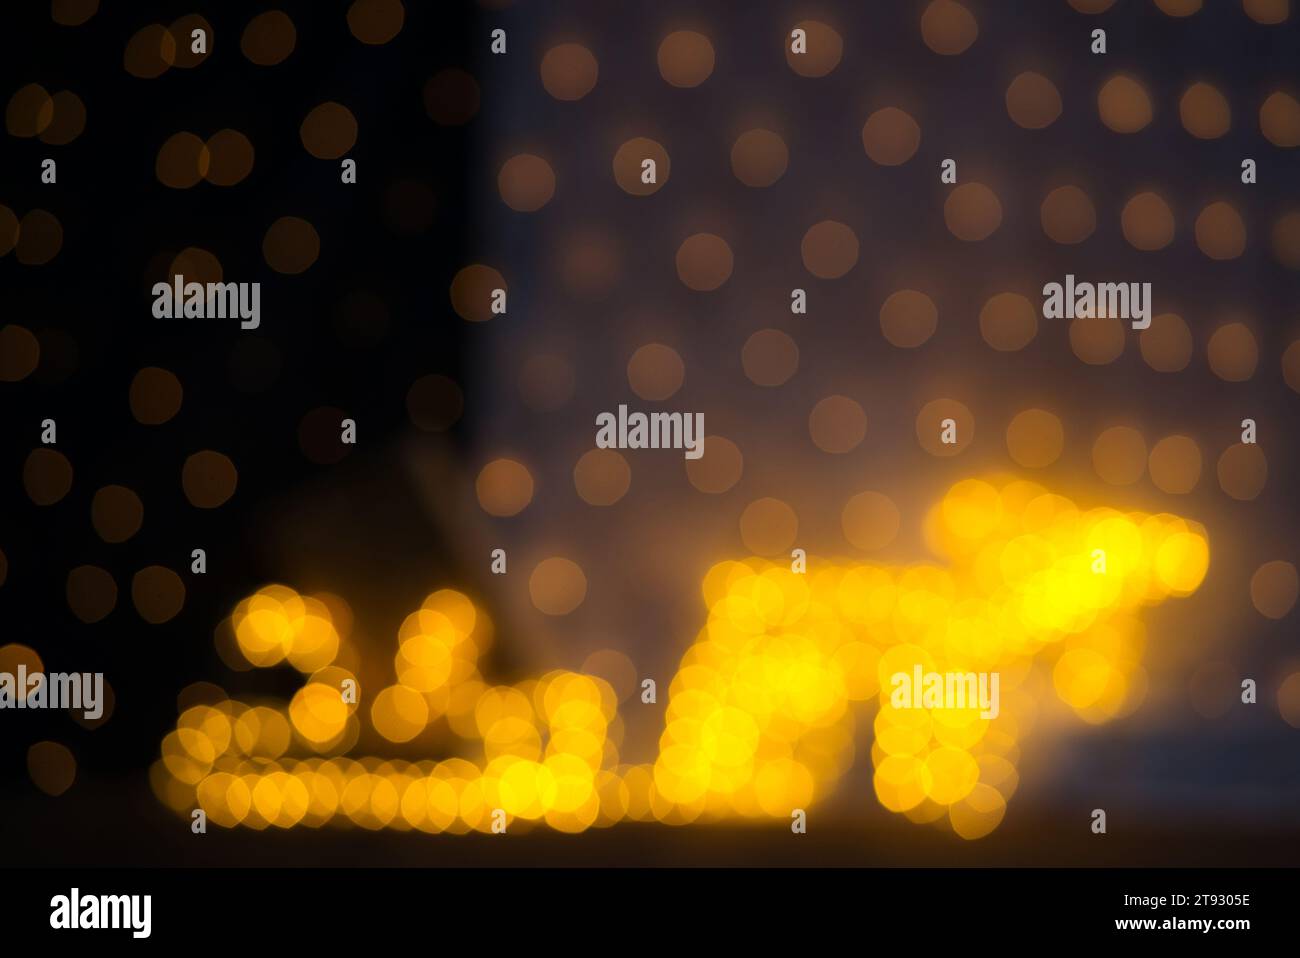 Immerse yourself in the enchanting atmosphere of this festive bokeh, captured with a 75mm lens on a full-frame camera. The image features a blurred ye Stock Photo